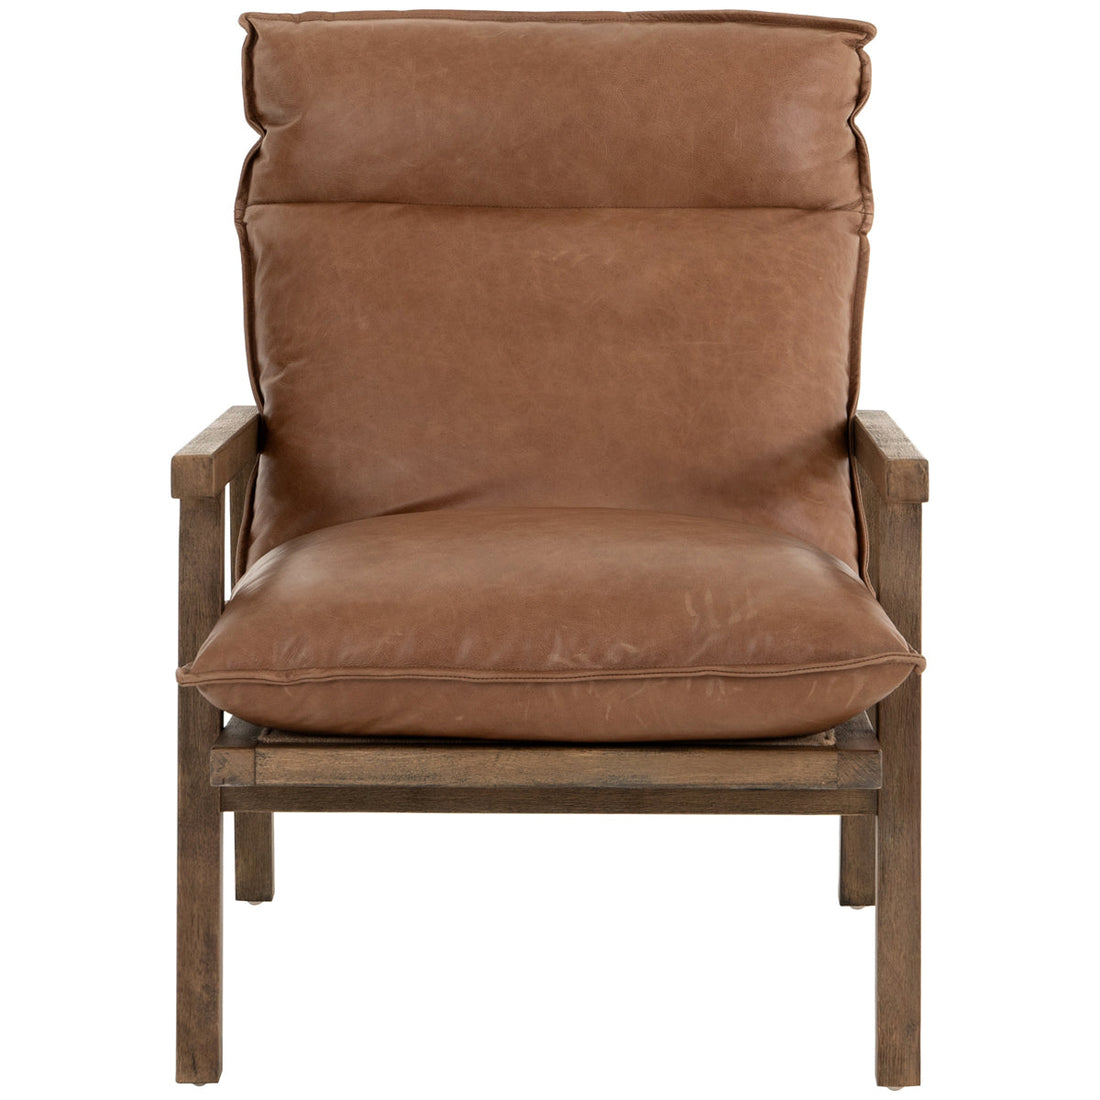 Four Hands Westgate Orion Leather Chair